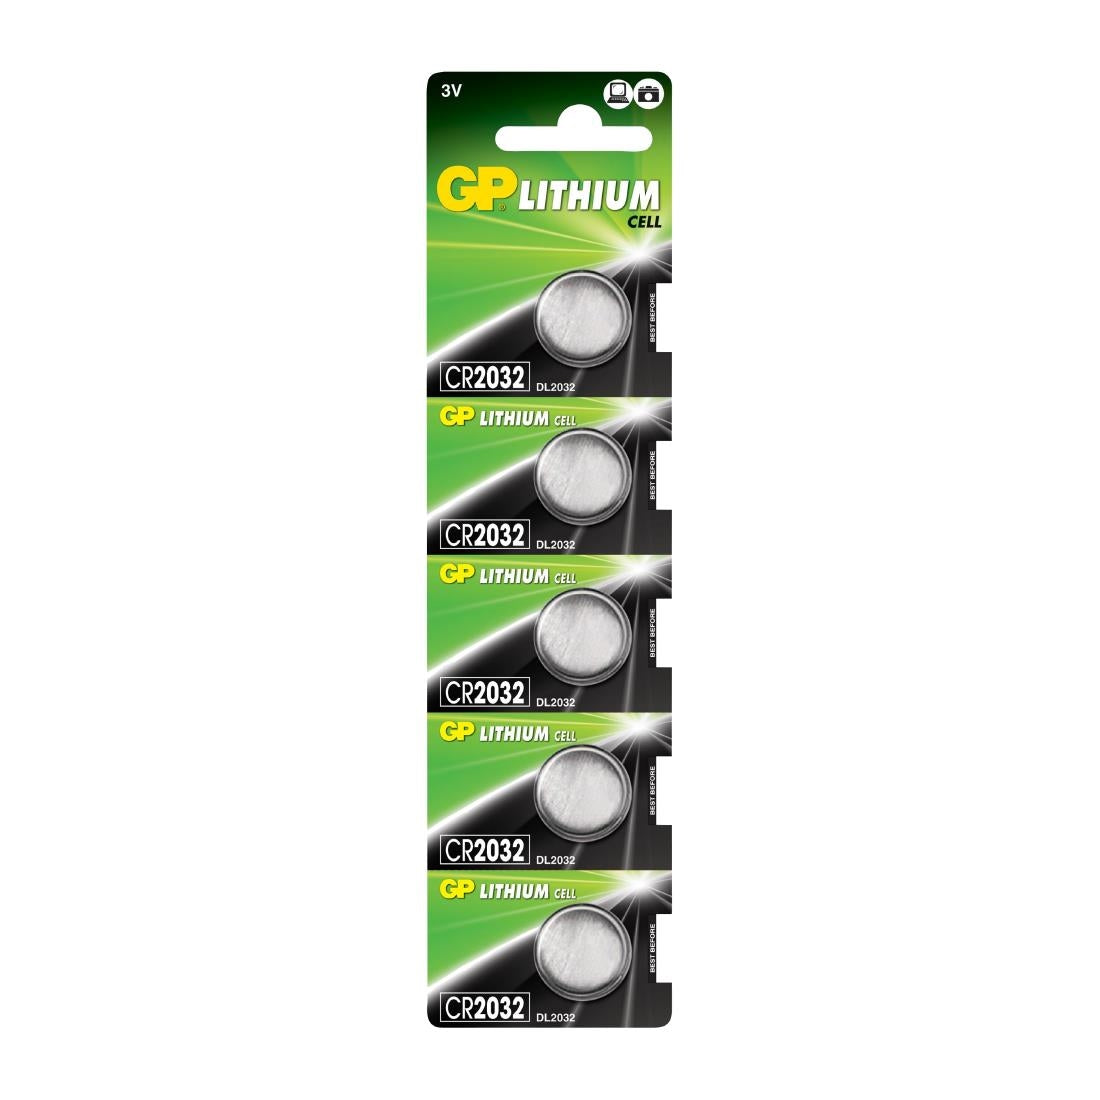 FT033 GP ButtonÂ Battery CR2032 (Pack of 5)